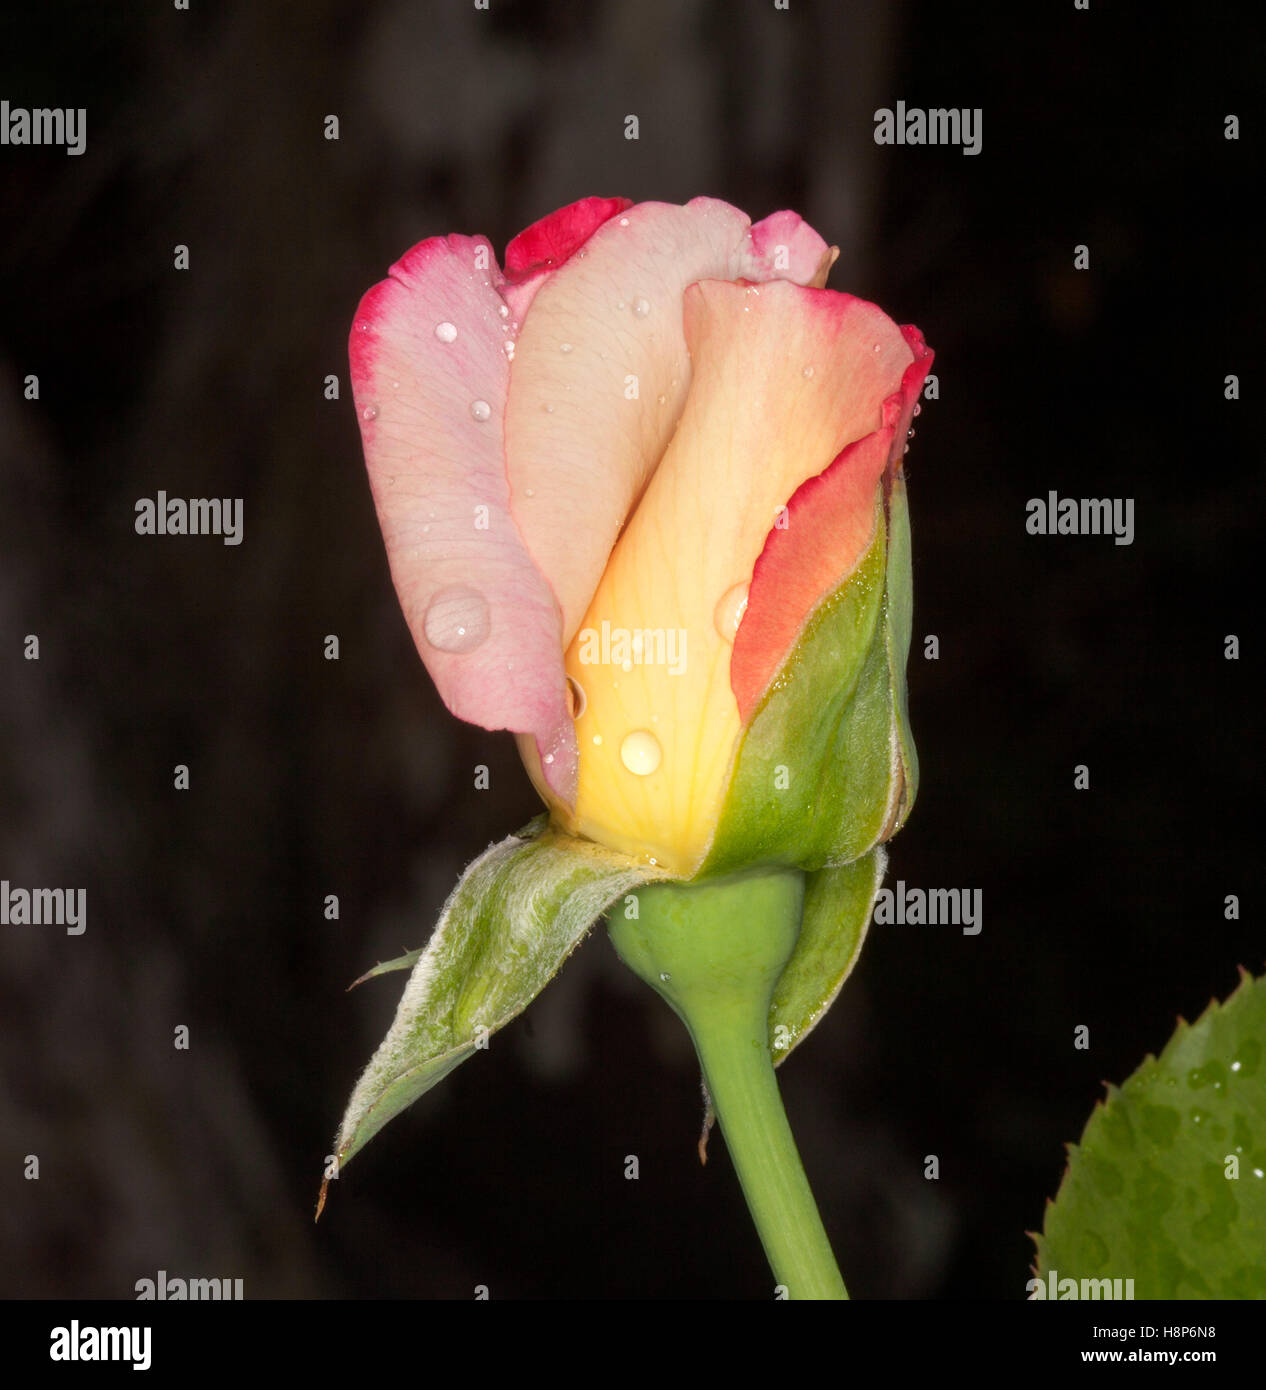 Beautiful pink, red and yellow bud of rose 'Double Delight' with raindrops on outer petals on dark background Stock Photo